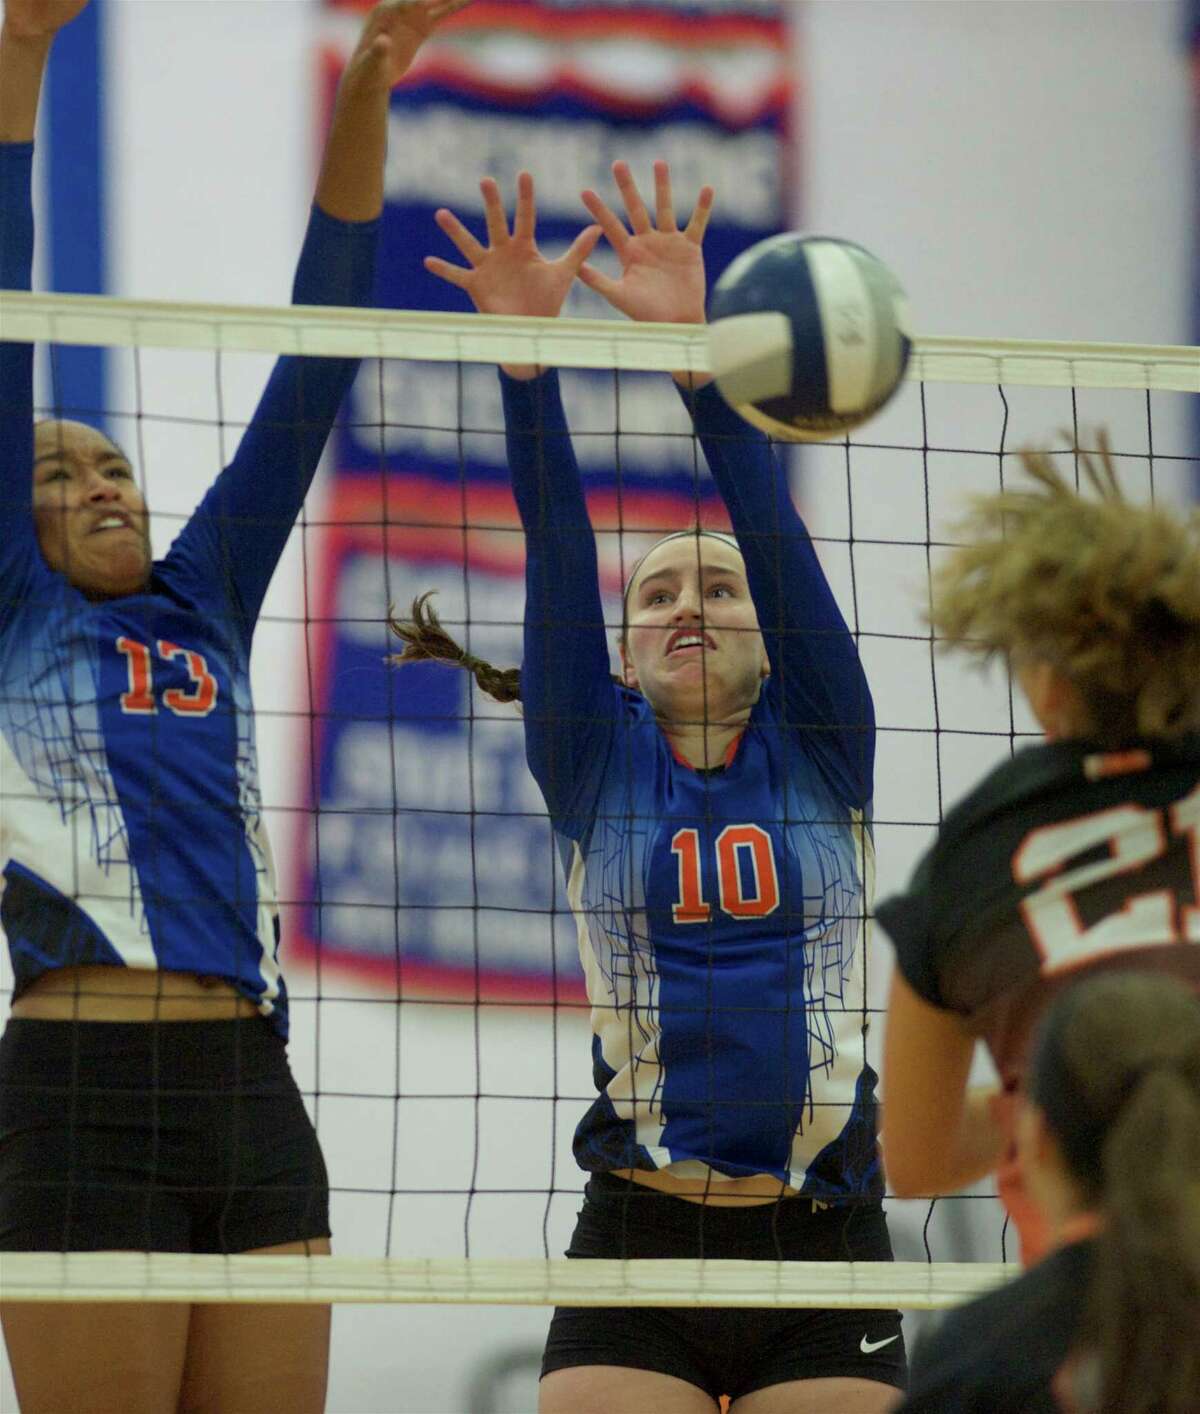 Danbury's Philecia Seipio, 13, and Shannon Geary, 10, go up for the block against Stamford's Anne Eilertsen during the Stamford High School and Danbury High School girls volleyball match, played at Danbury High School, Danbury, Conn, on Wednesday, September 17, 2014. Stamford won the match 3 games to 1.